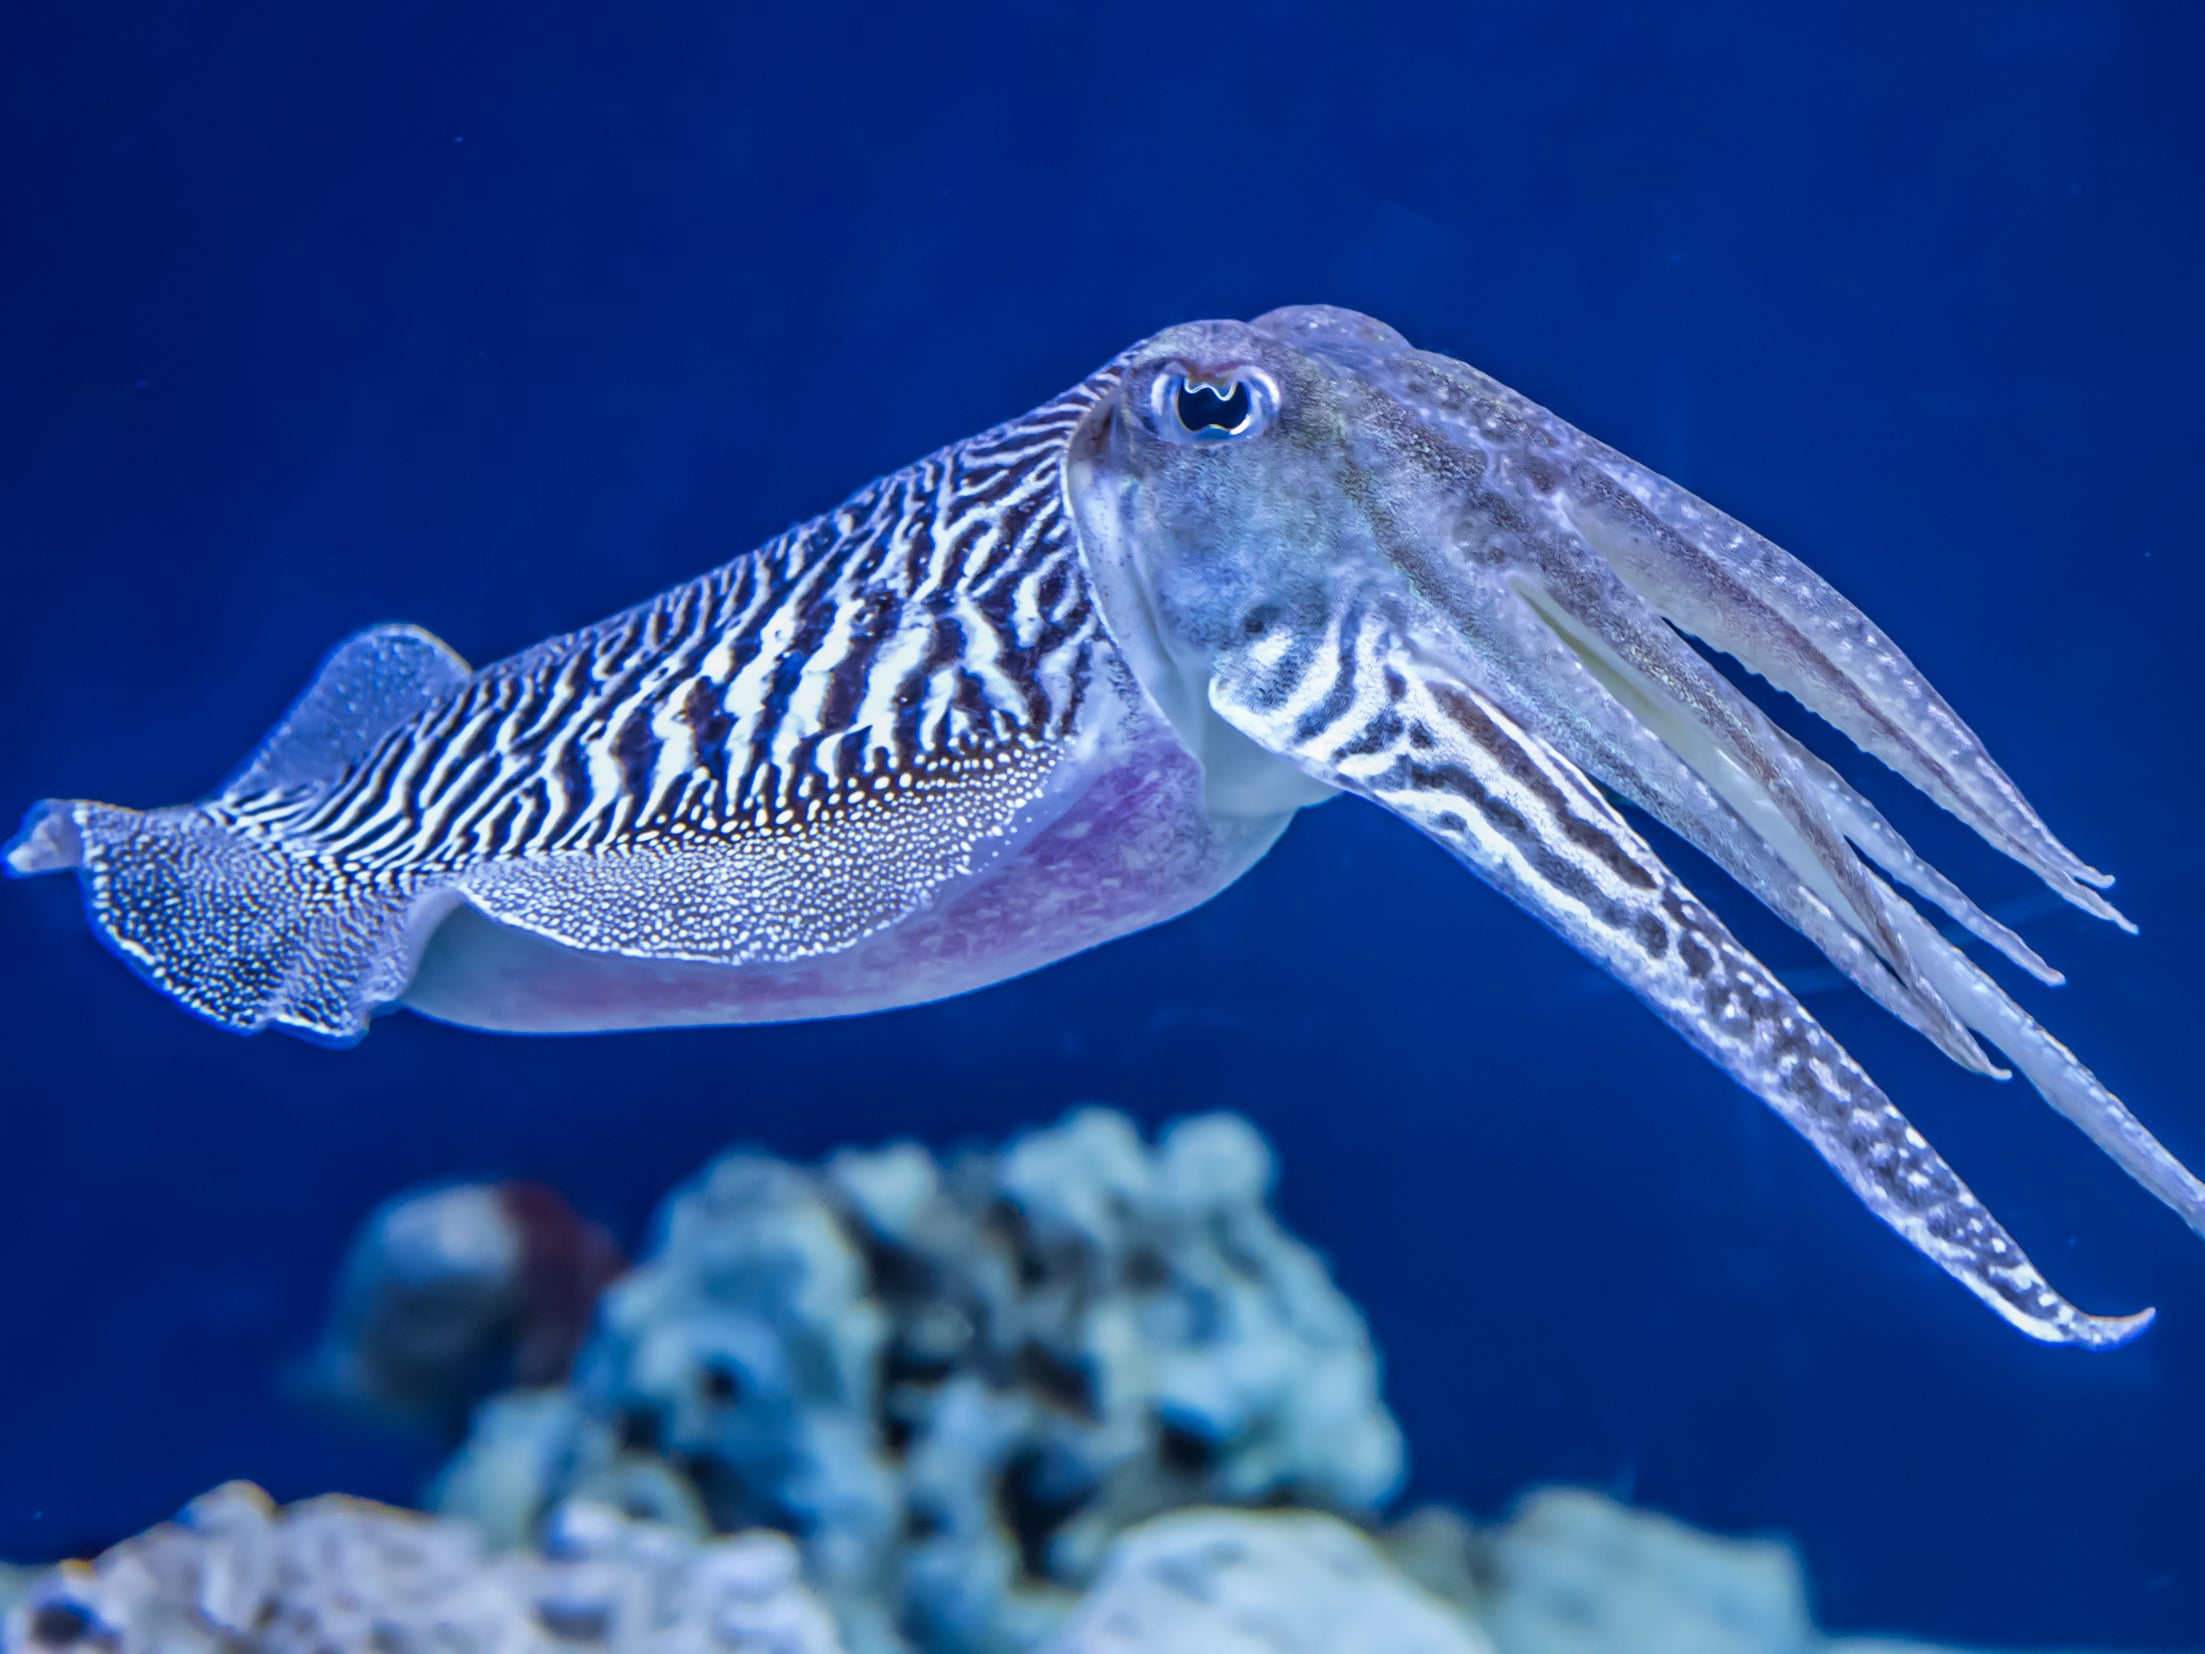 The European common cuttlefish (Sepia officinalis) is generally found in the eastern North Atlantic, the English Channel and the Mediterranean Sea